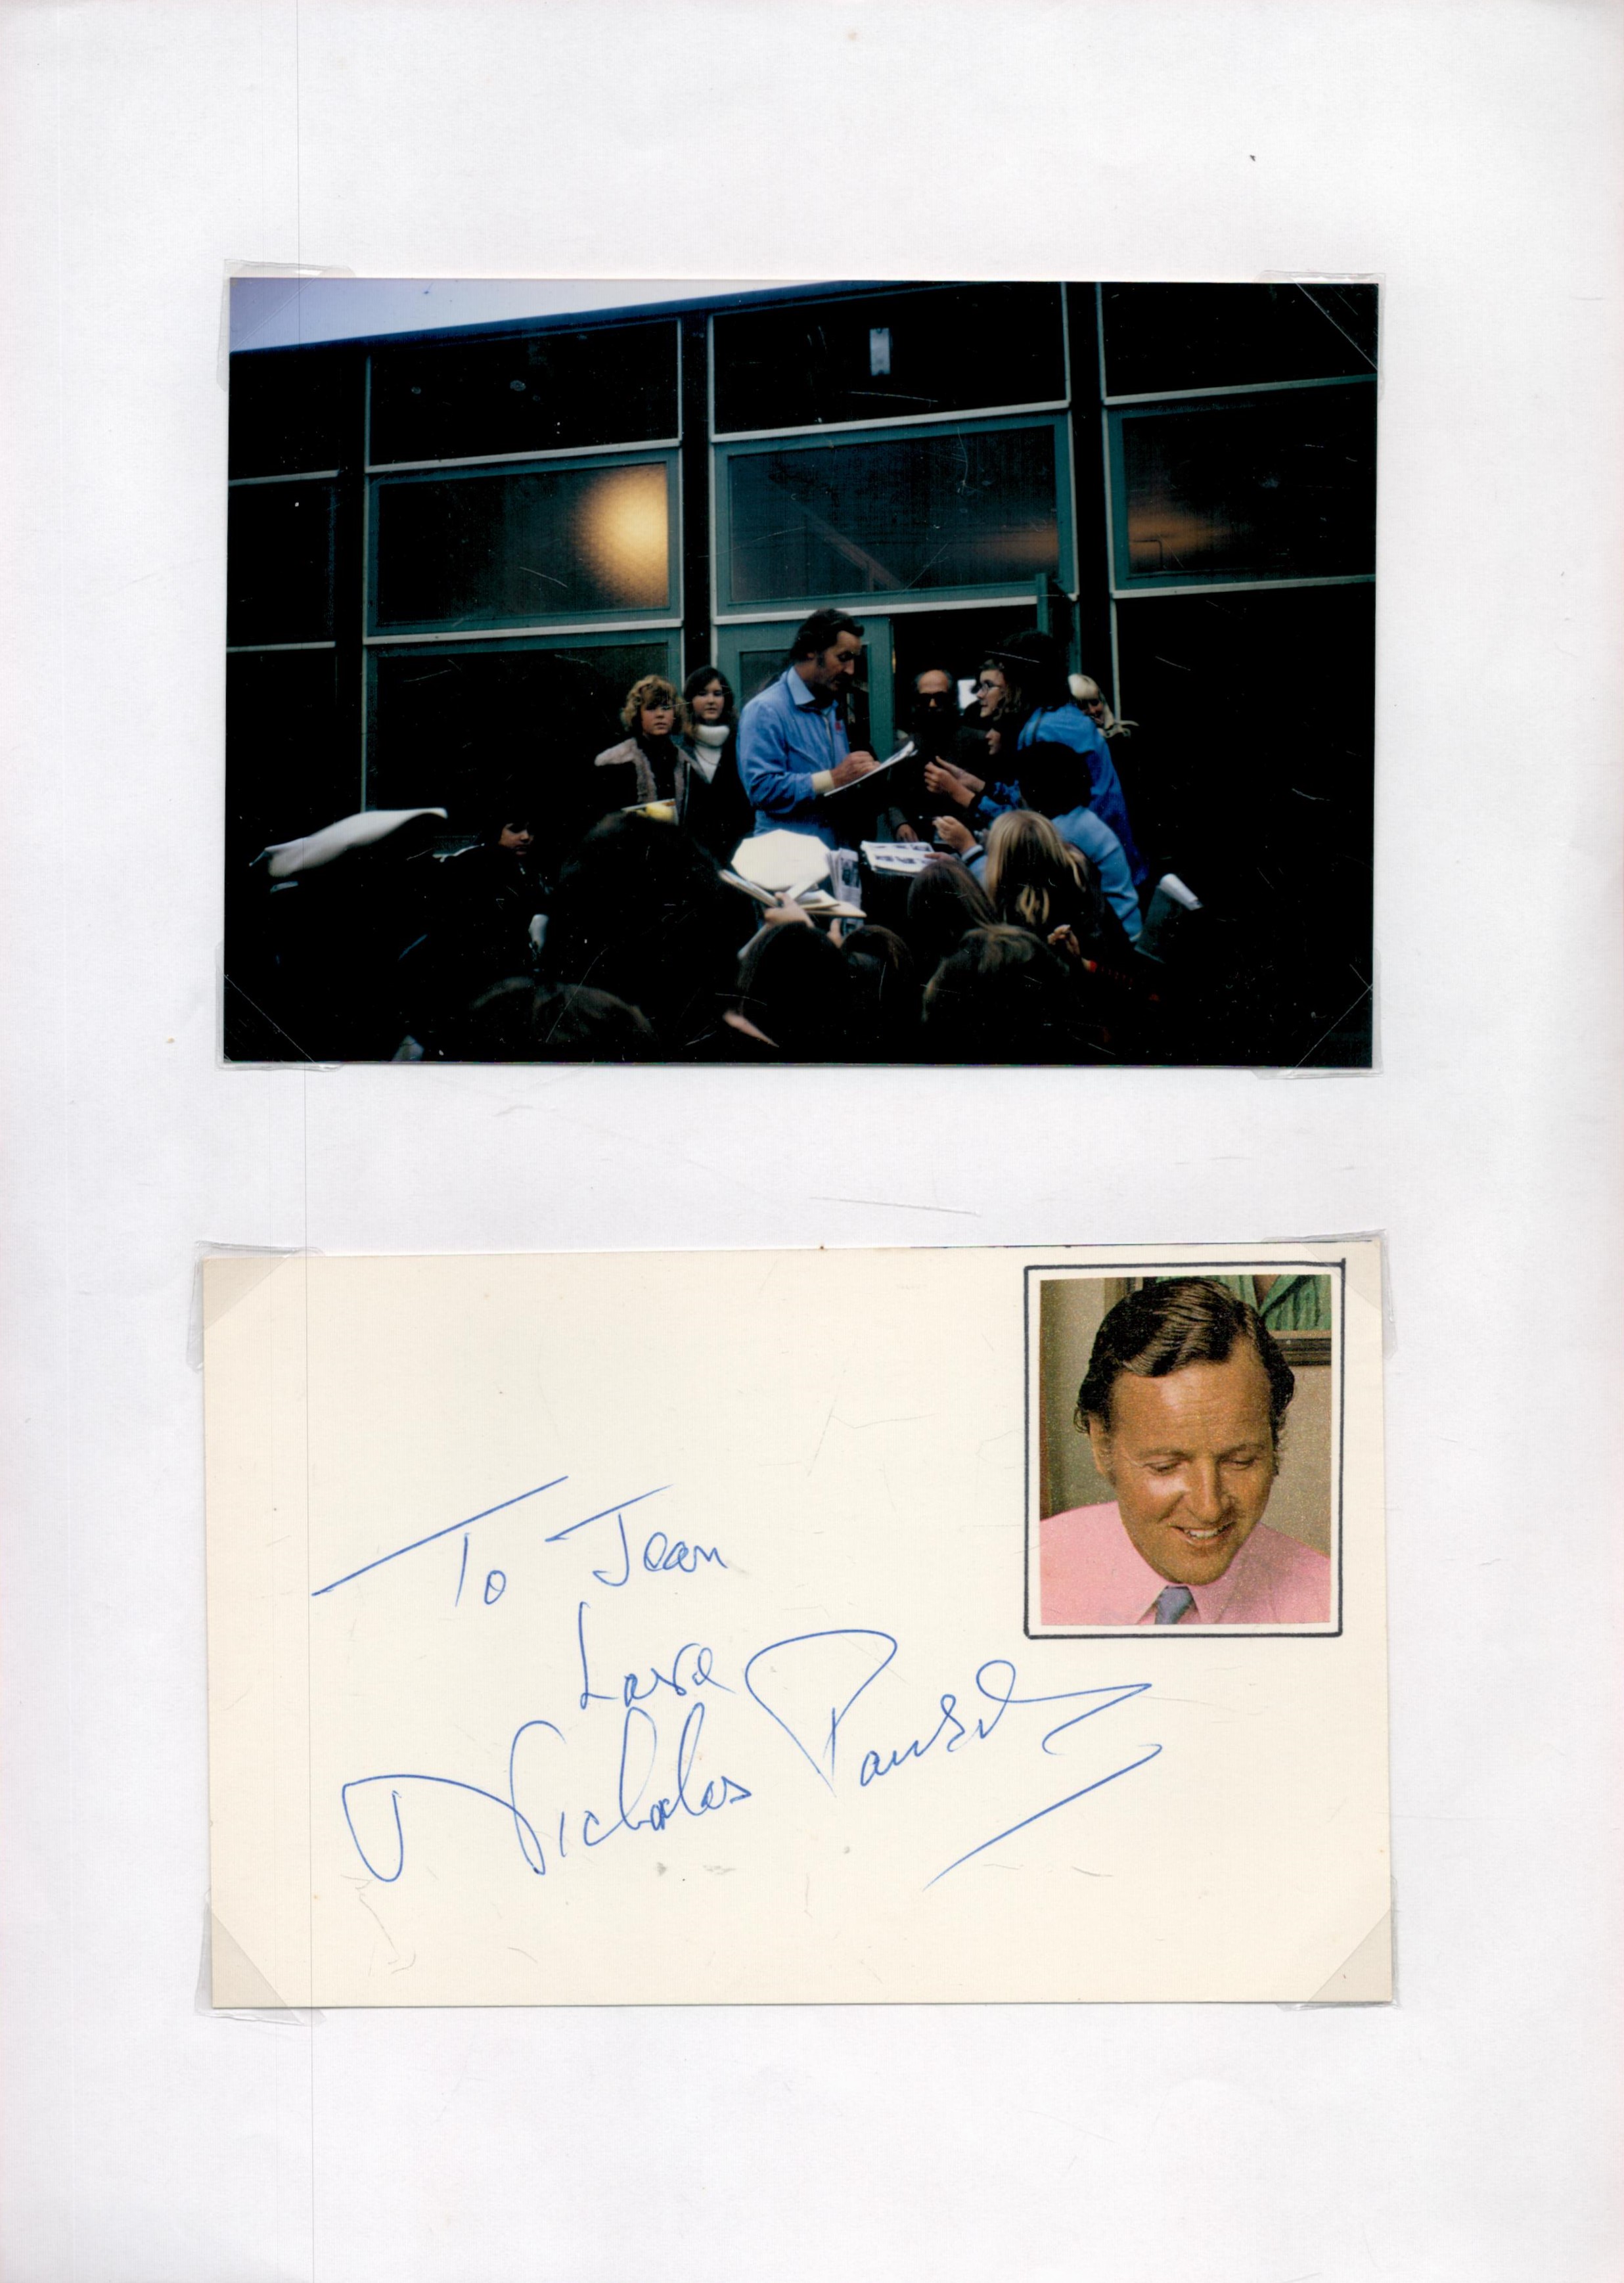 Nicholas Parsons CBE Signed Autograph Card, Attached to A4 White Paper with Colour Photo also